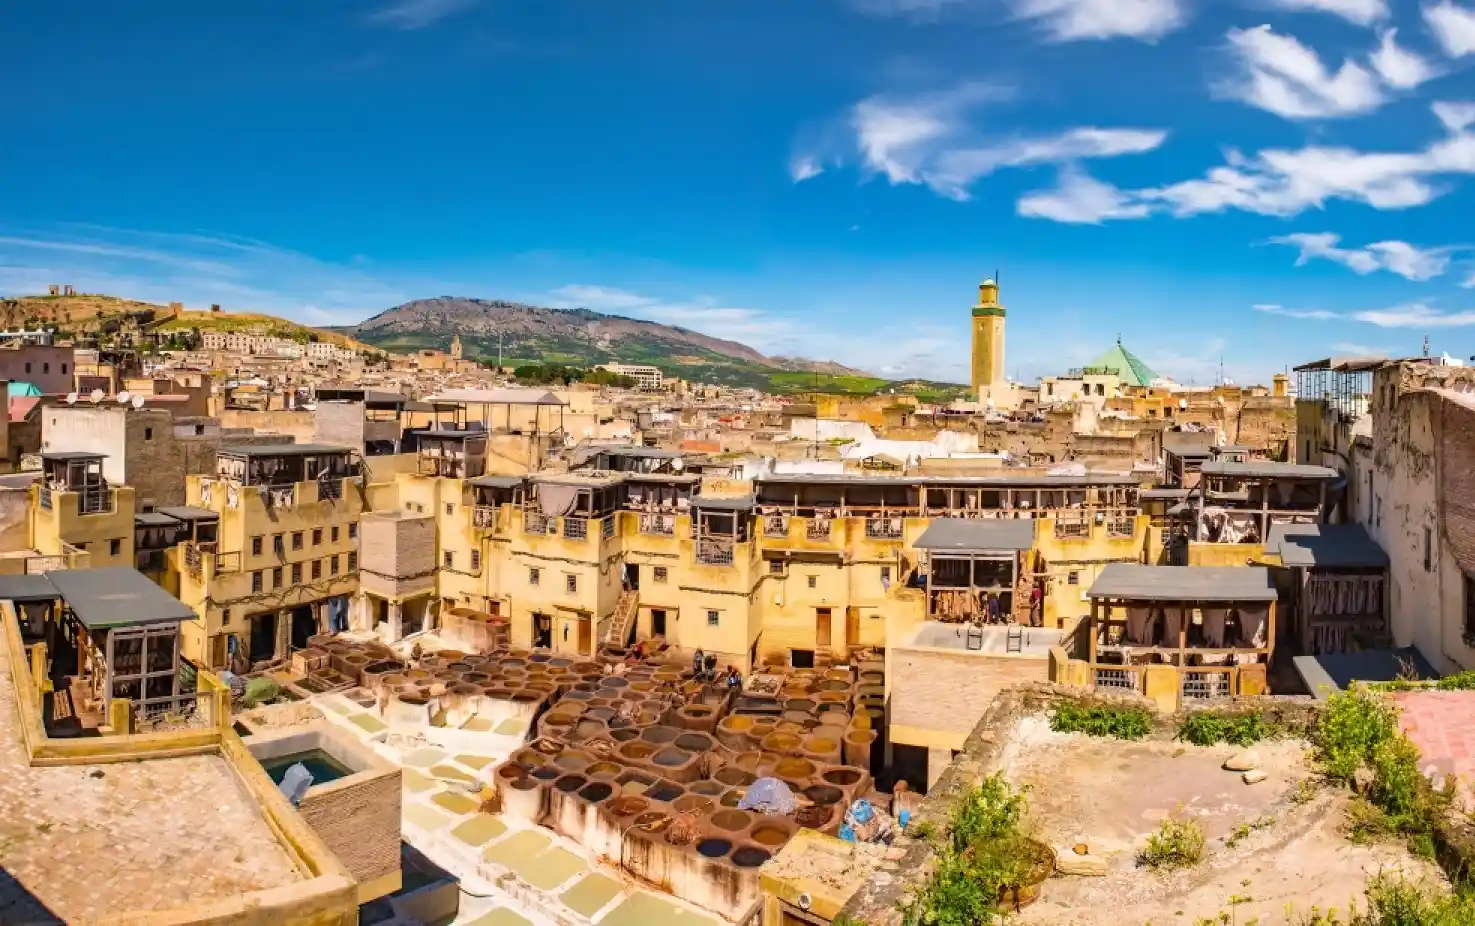 Day 3: Fes guided tour